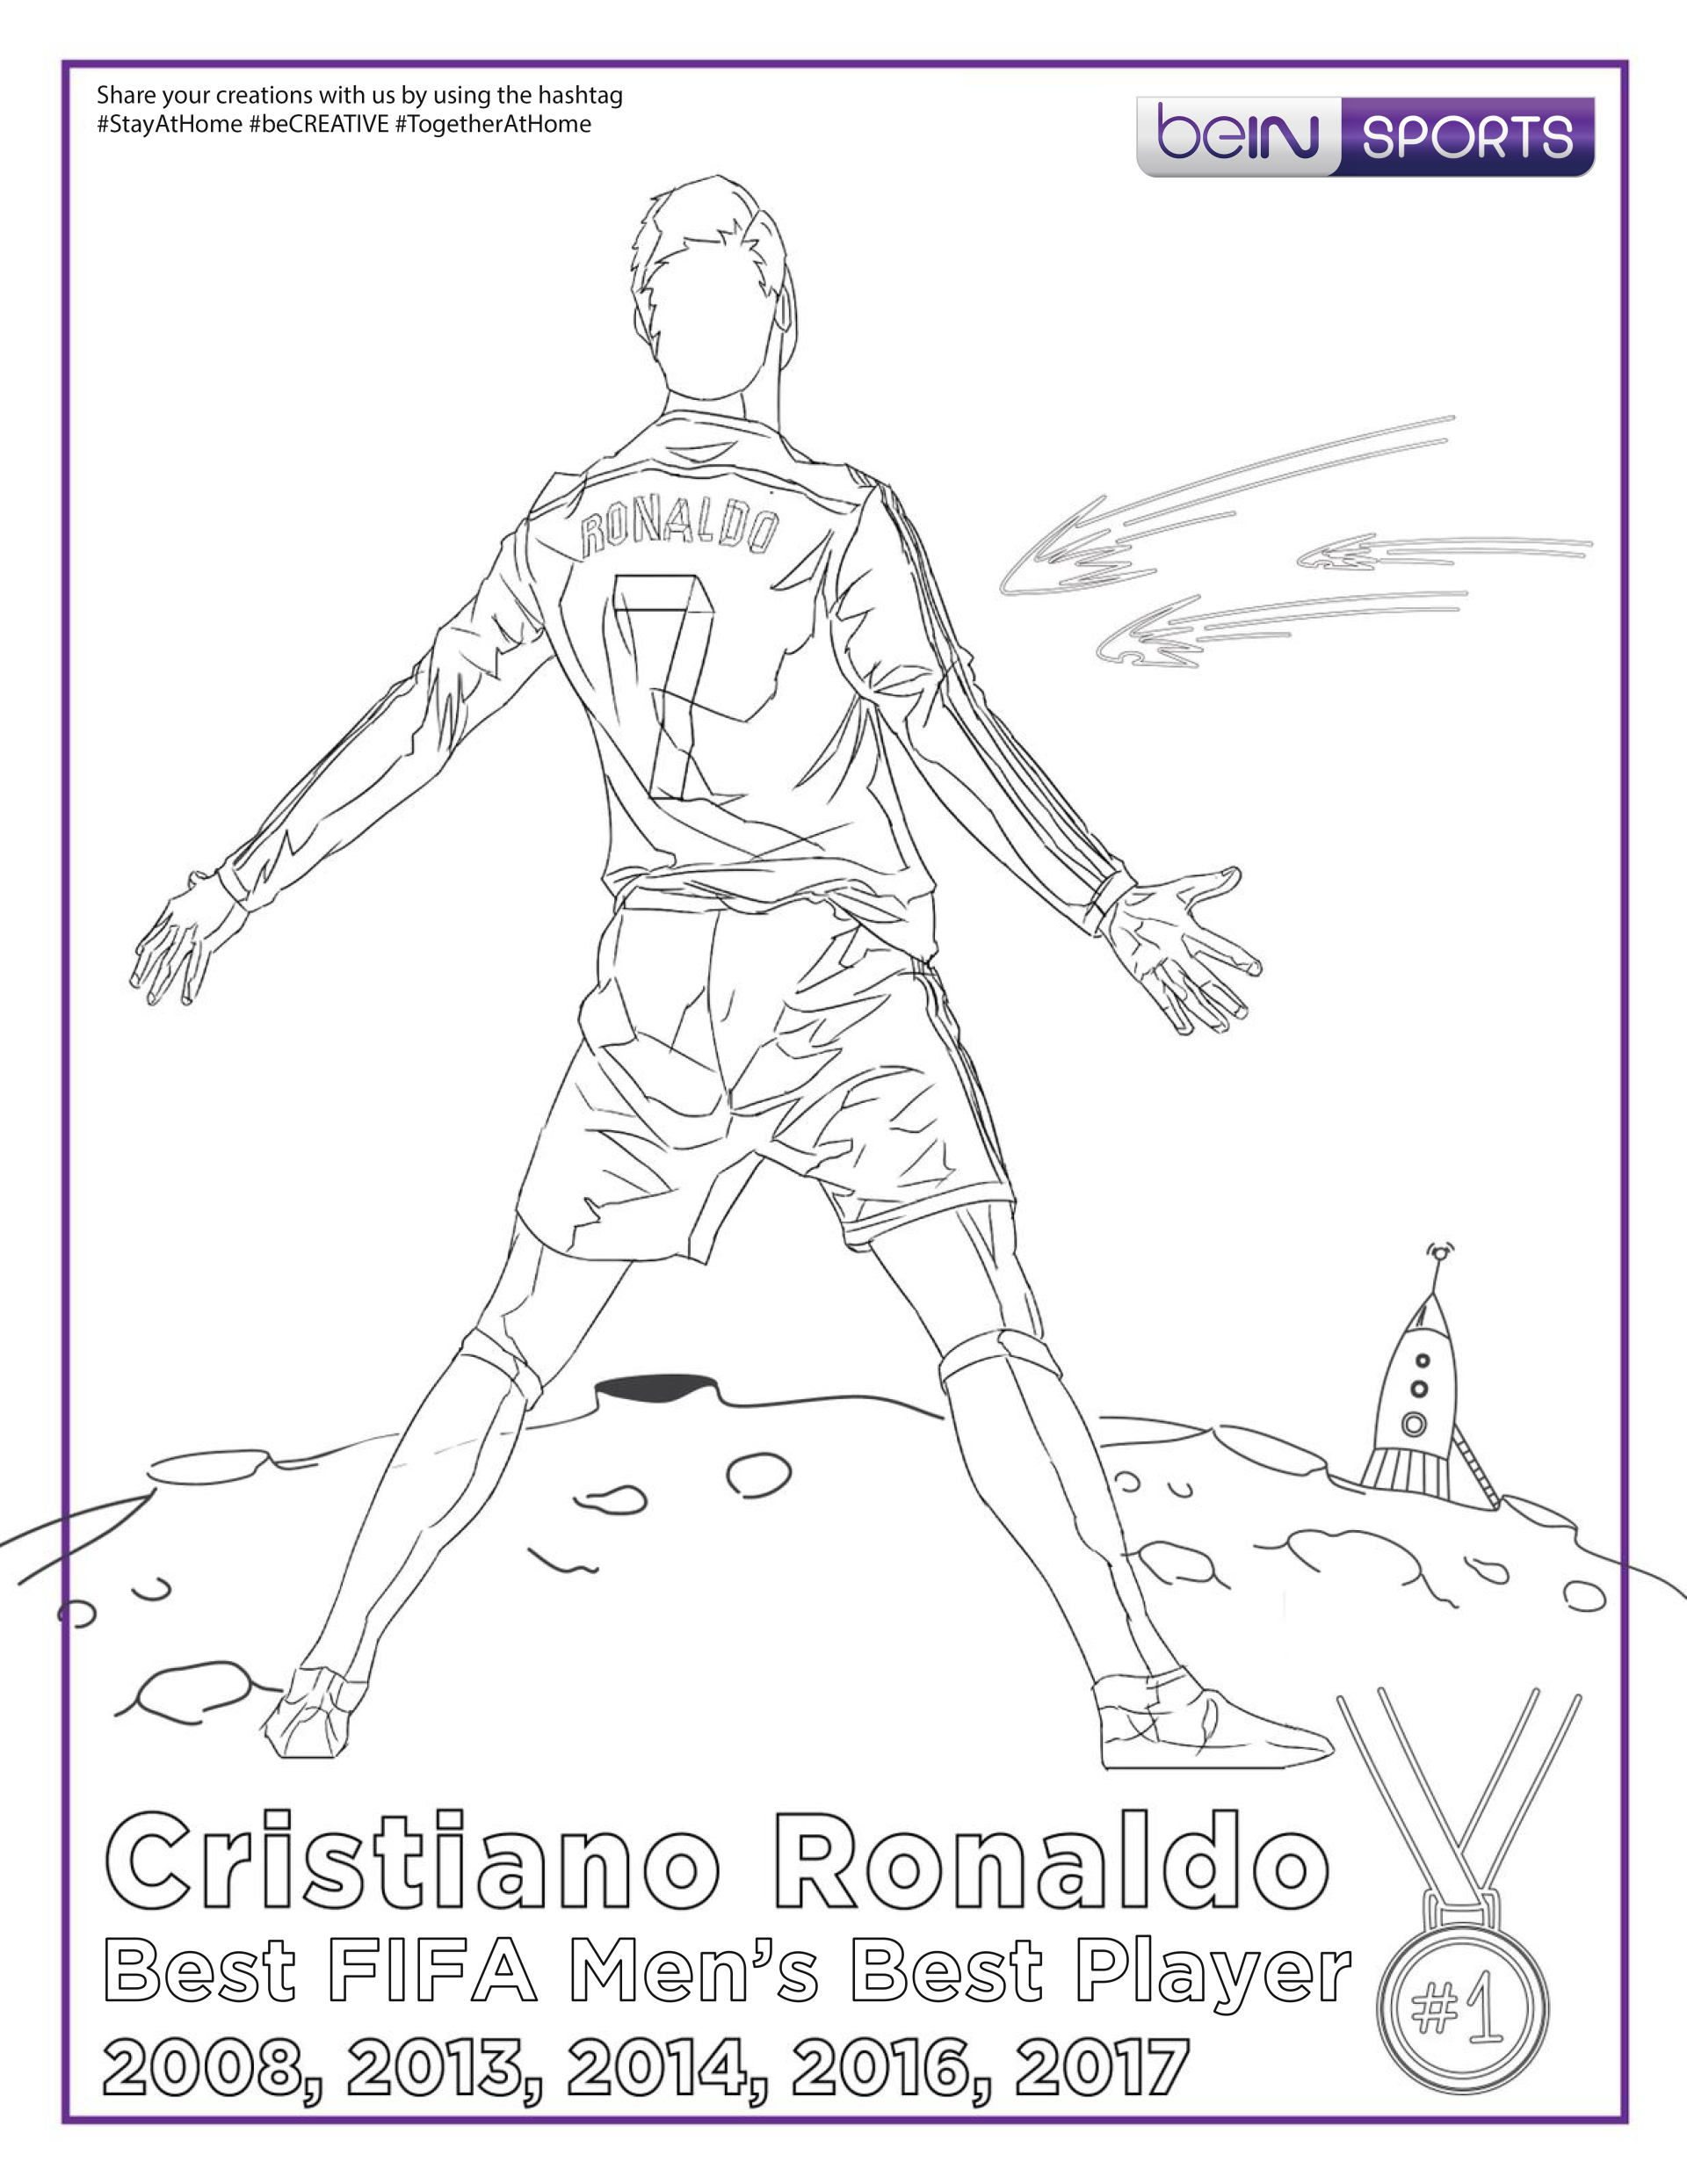 Colouring book images singapore bein sports